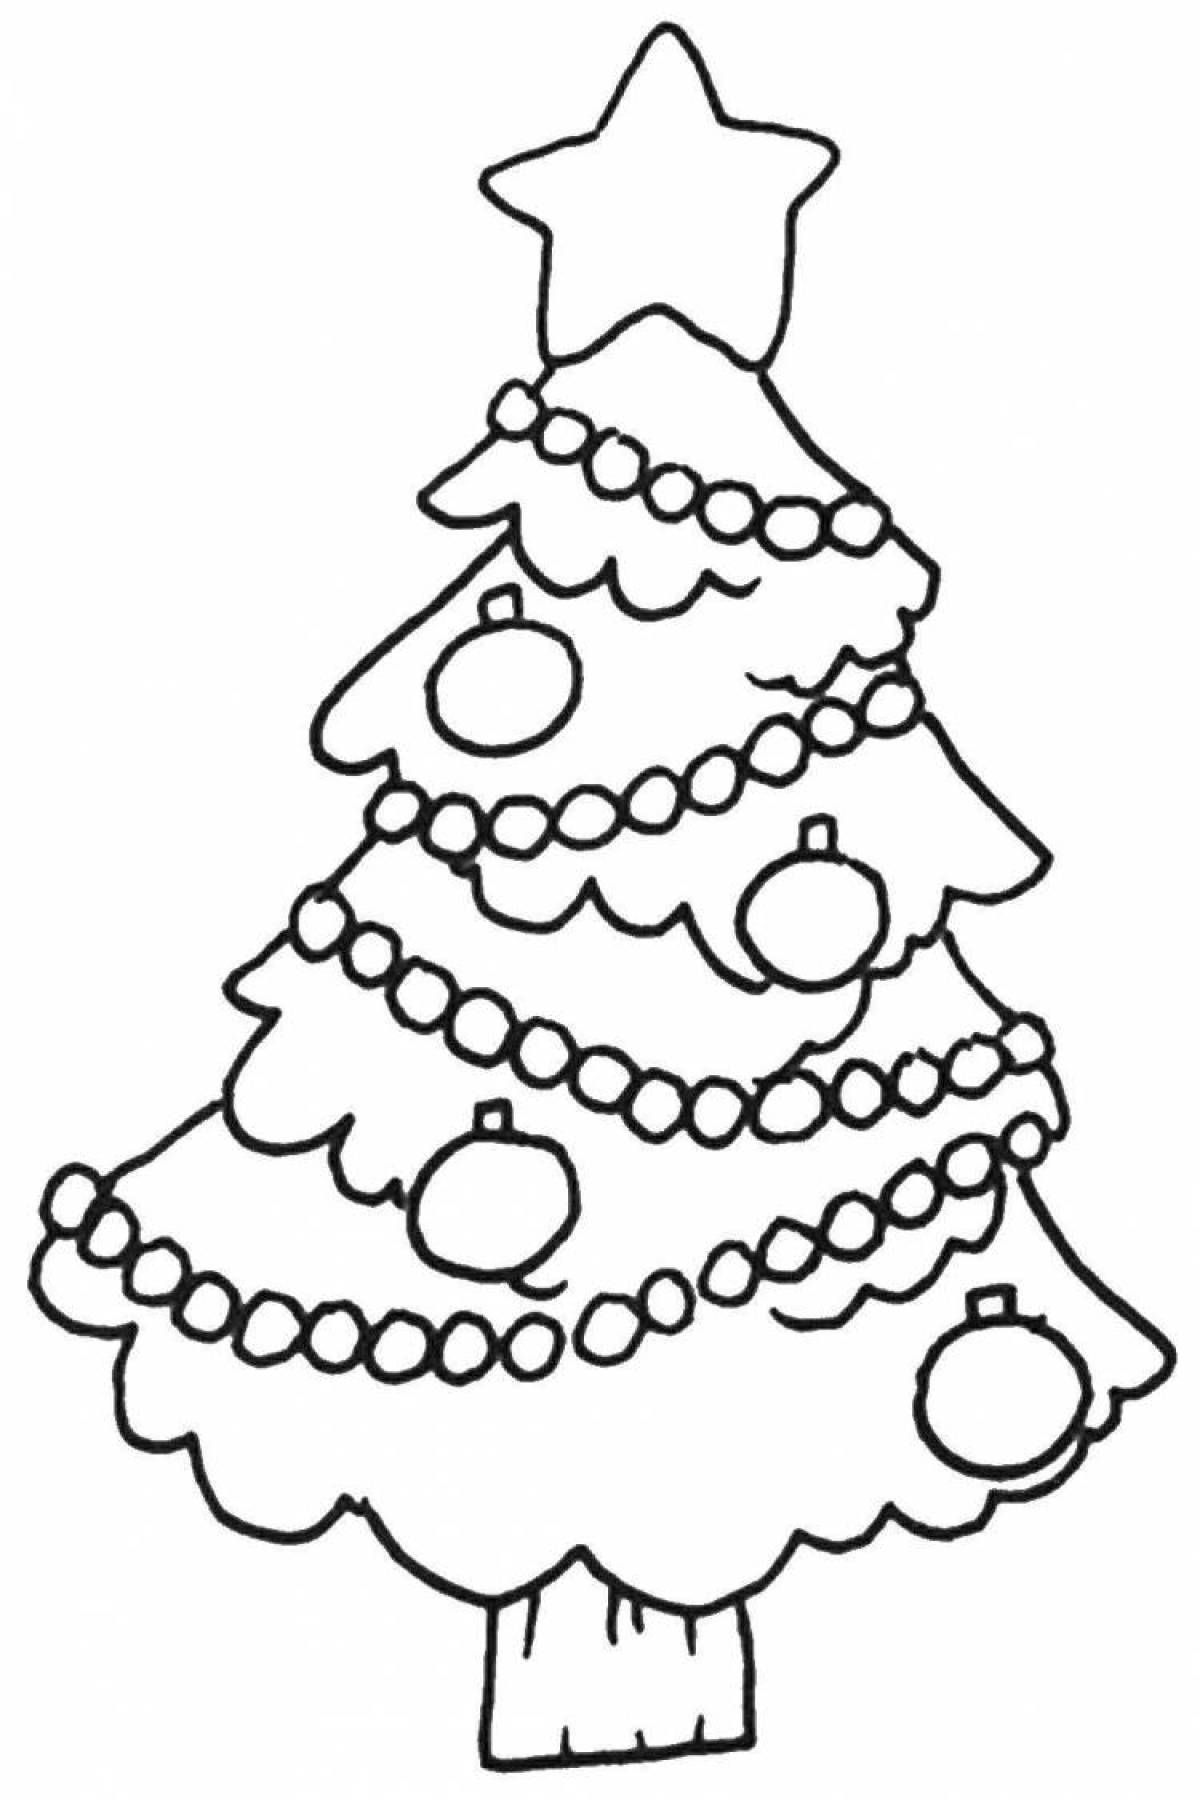 Fabulous Christmas tree coloring book for children 3-4 years old